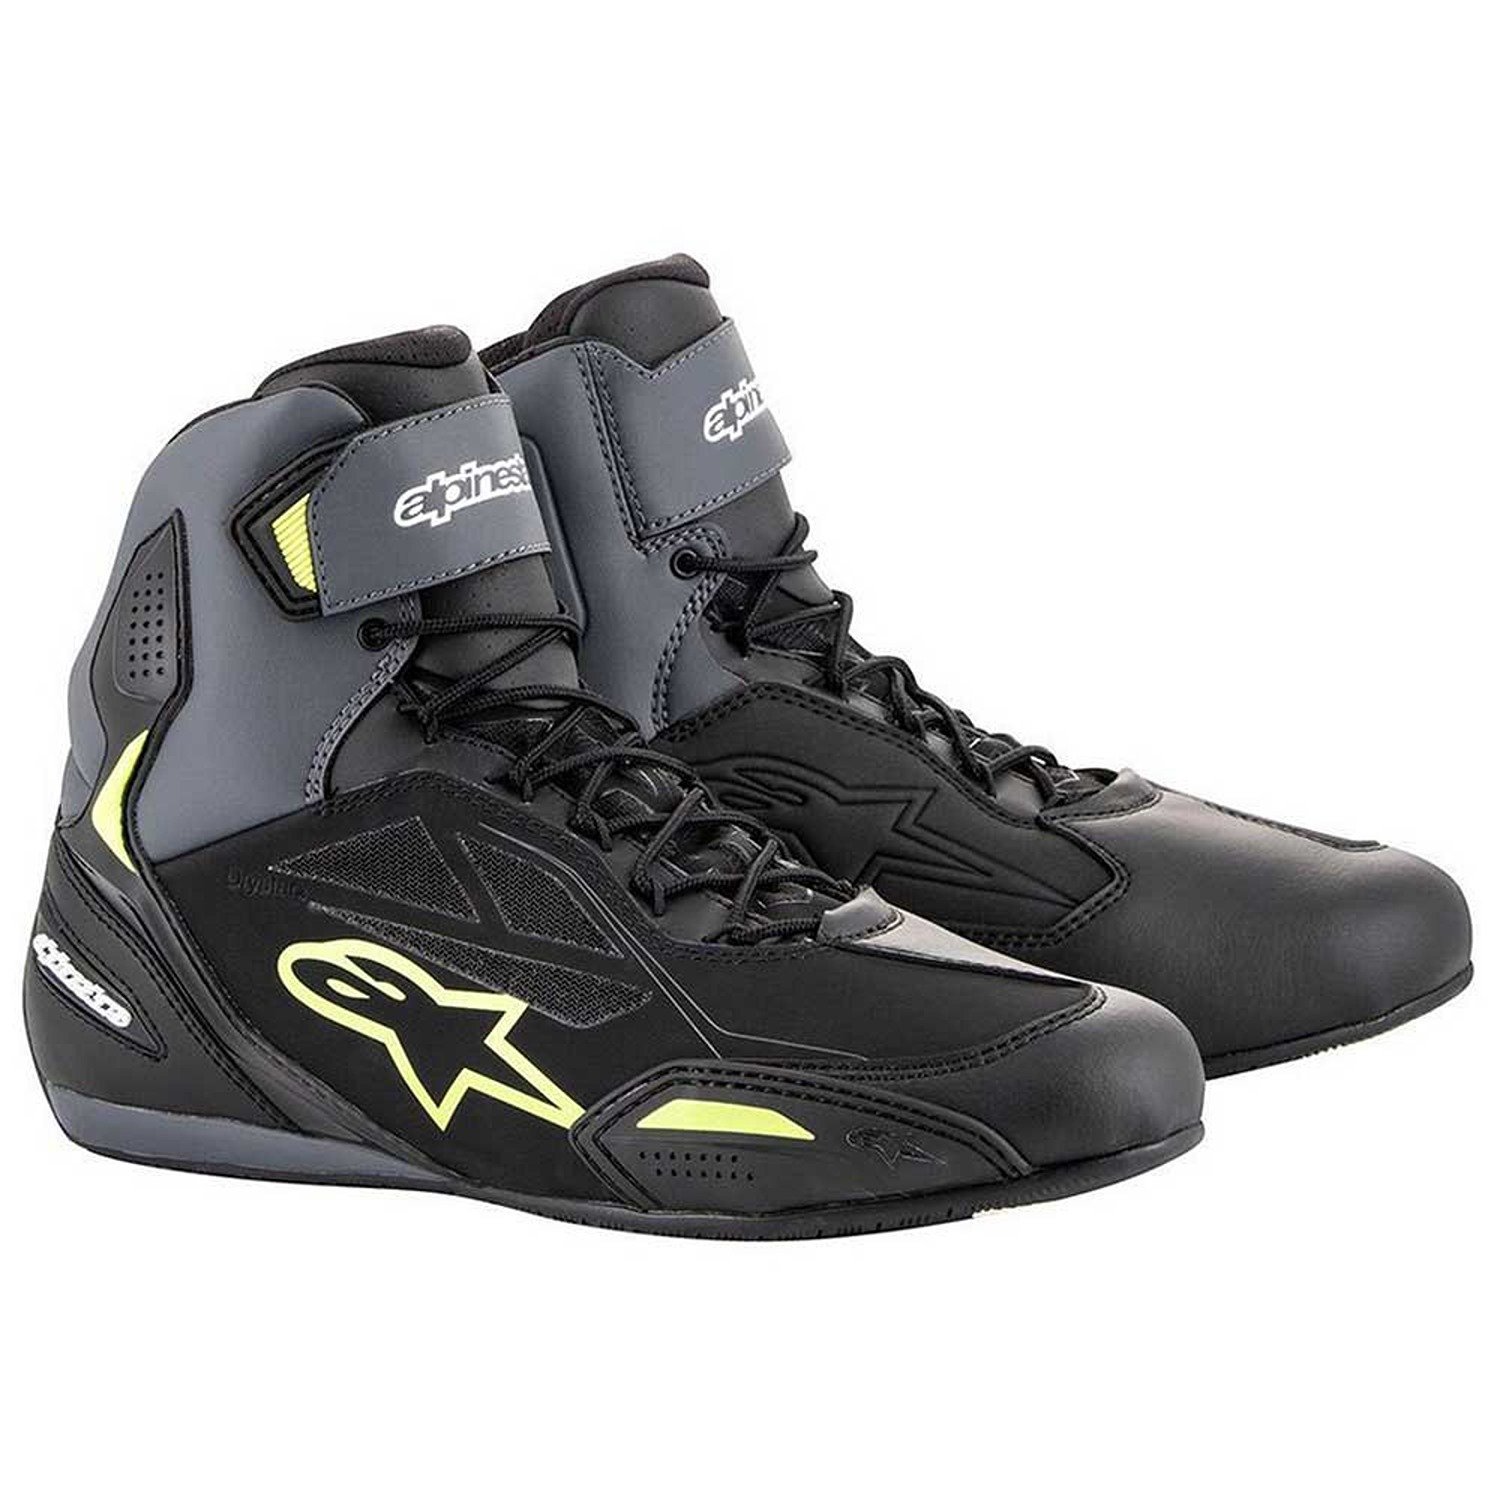 Image of Alpinestars Faster-3 Shoes Black Yellow Fluo Size US 135 EN